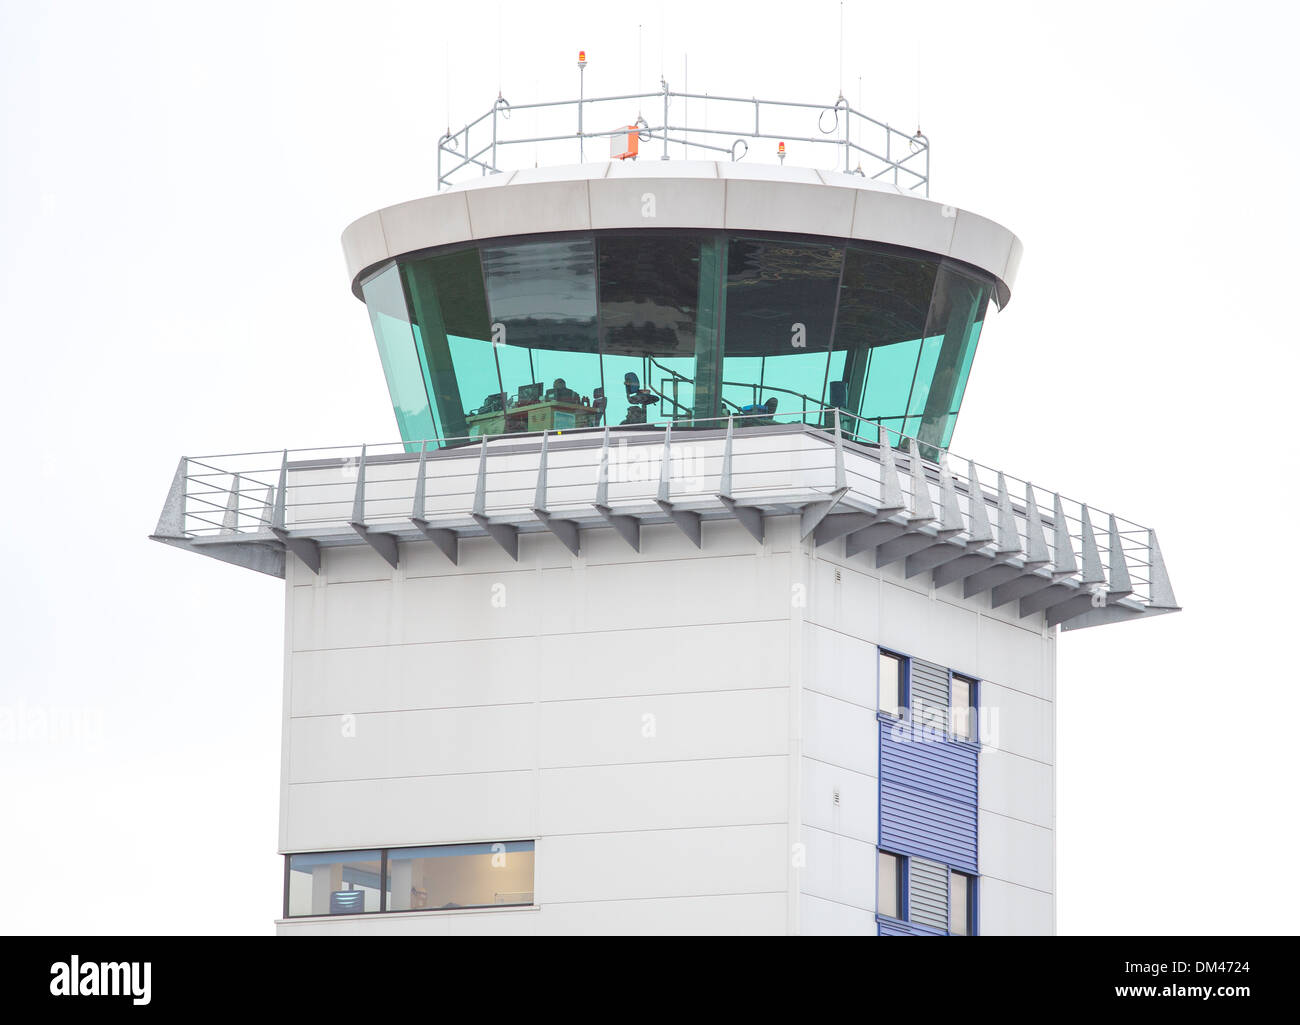 29/11/2013 London Southend airport control tower Stock Photo